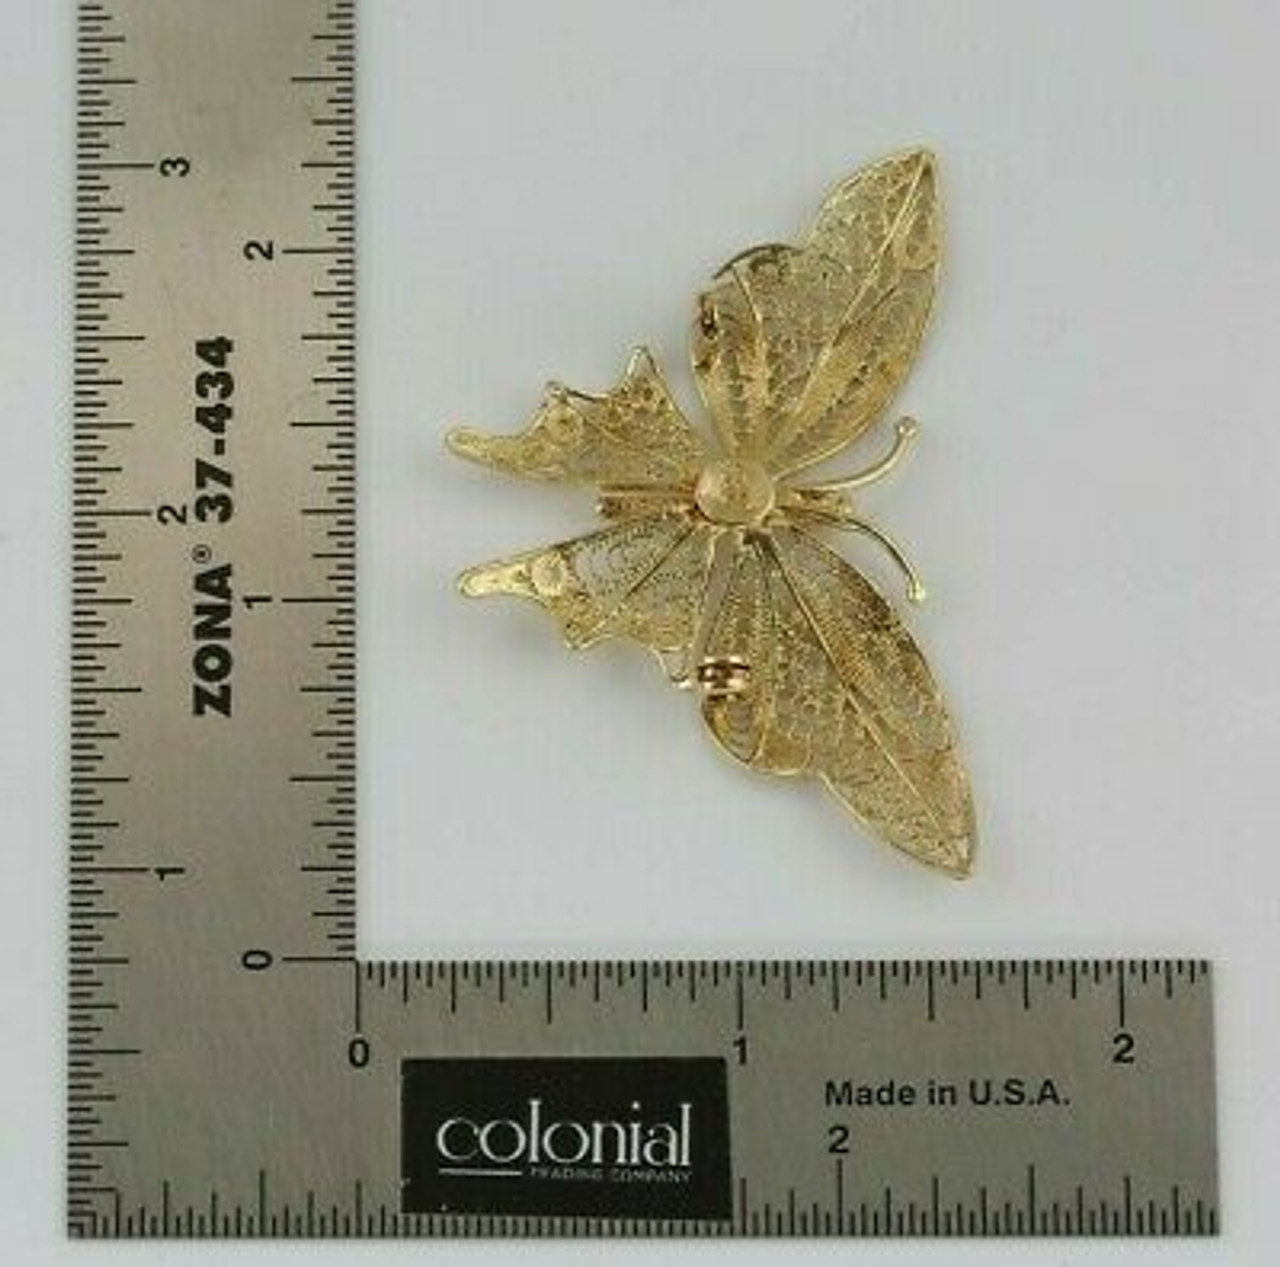 14K Yellow Gold Filigree Butterfly Pin Circa 1980 - Colonial Trading Company